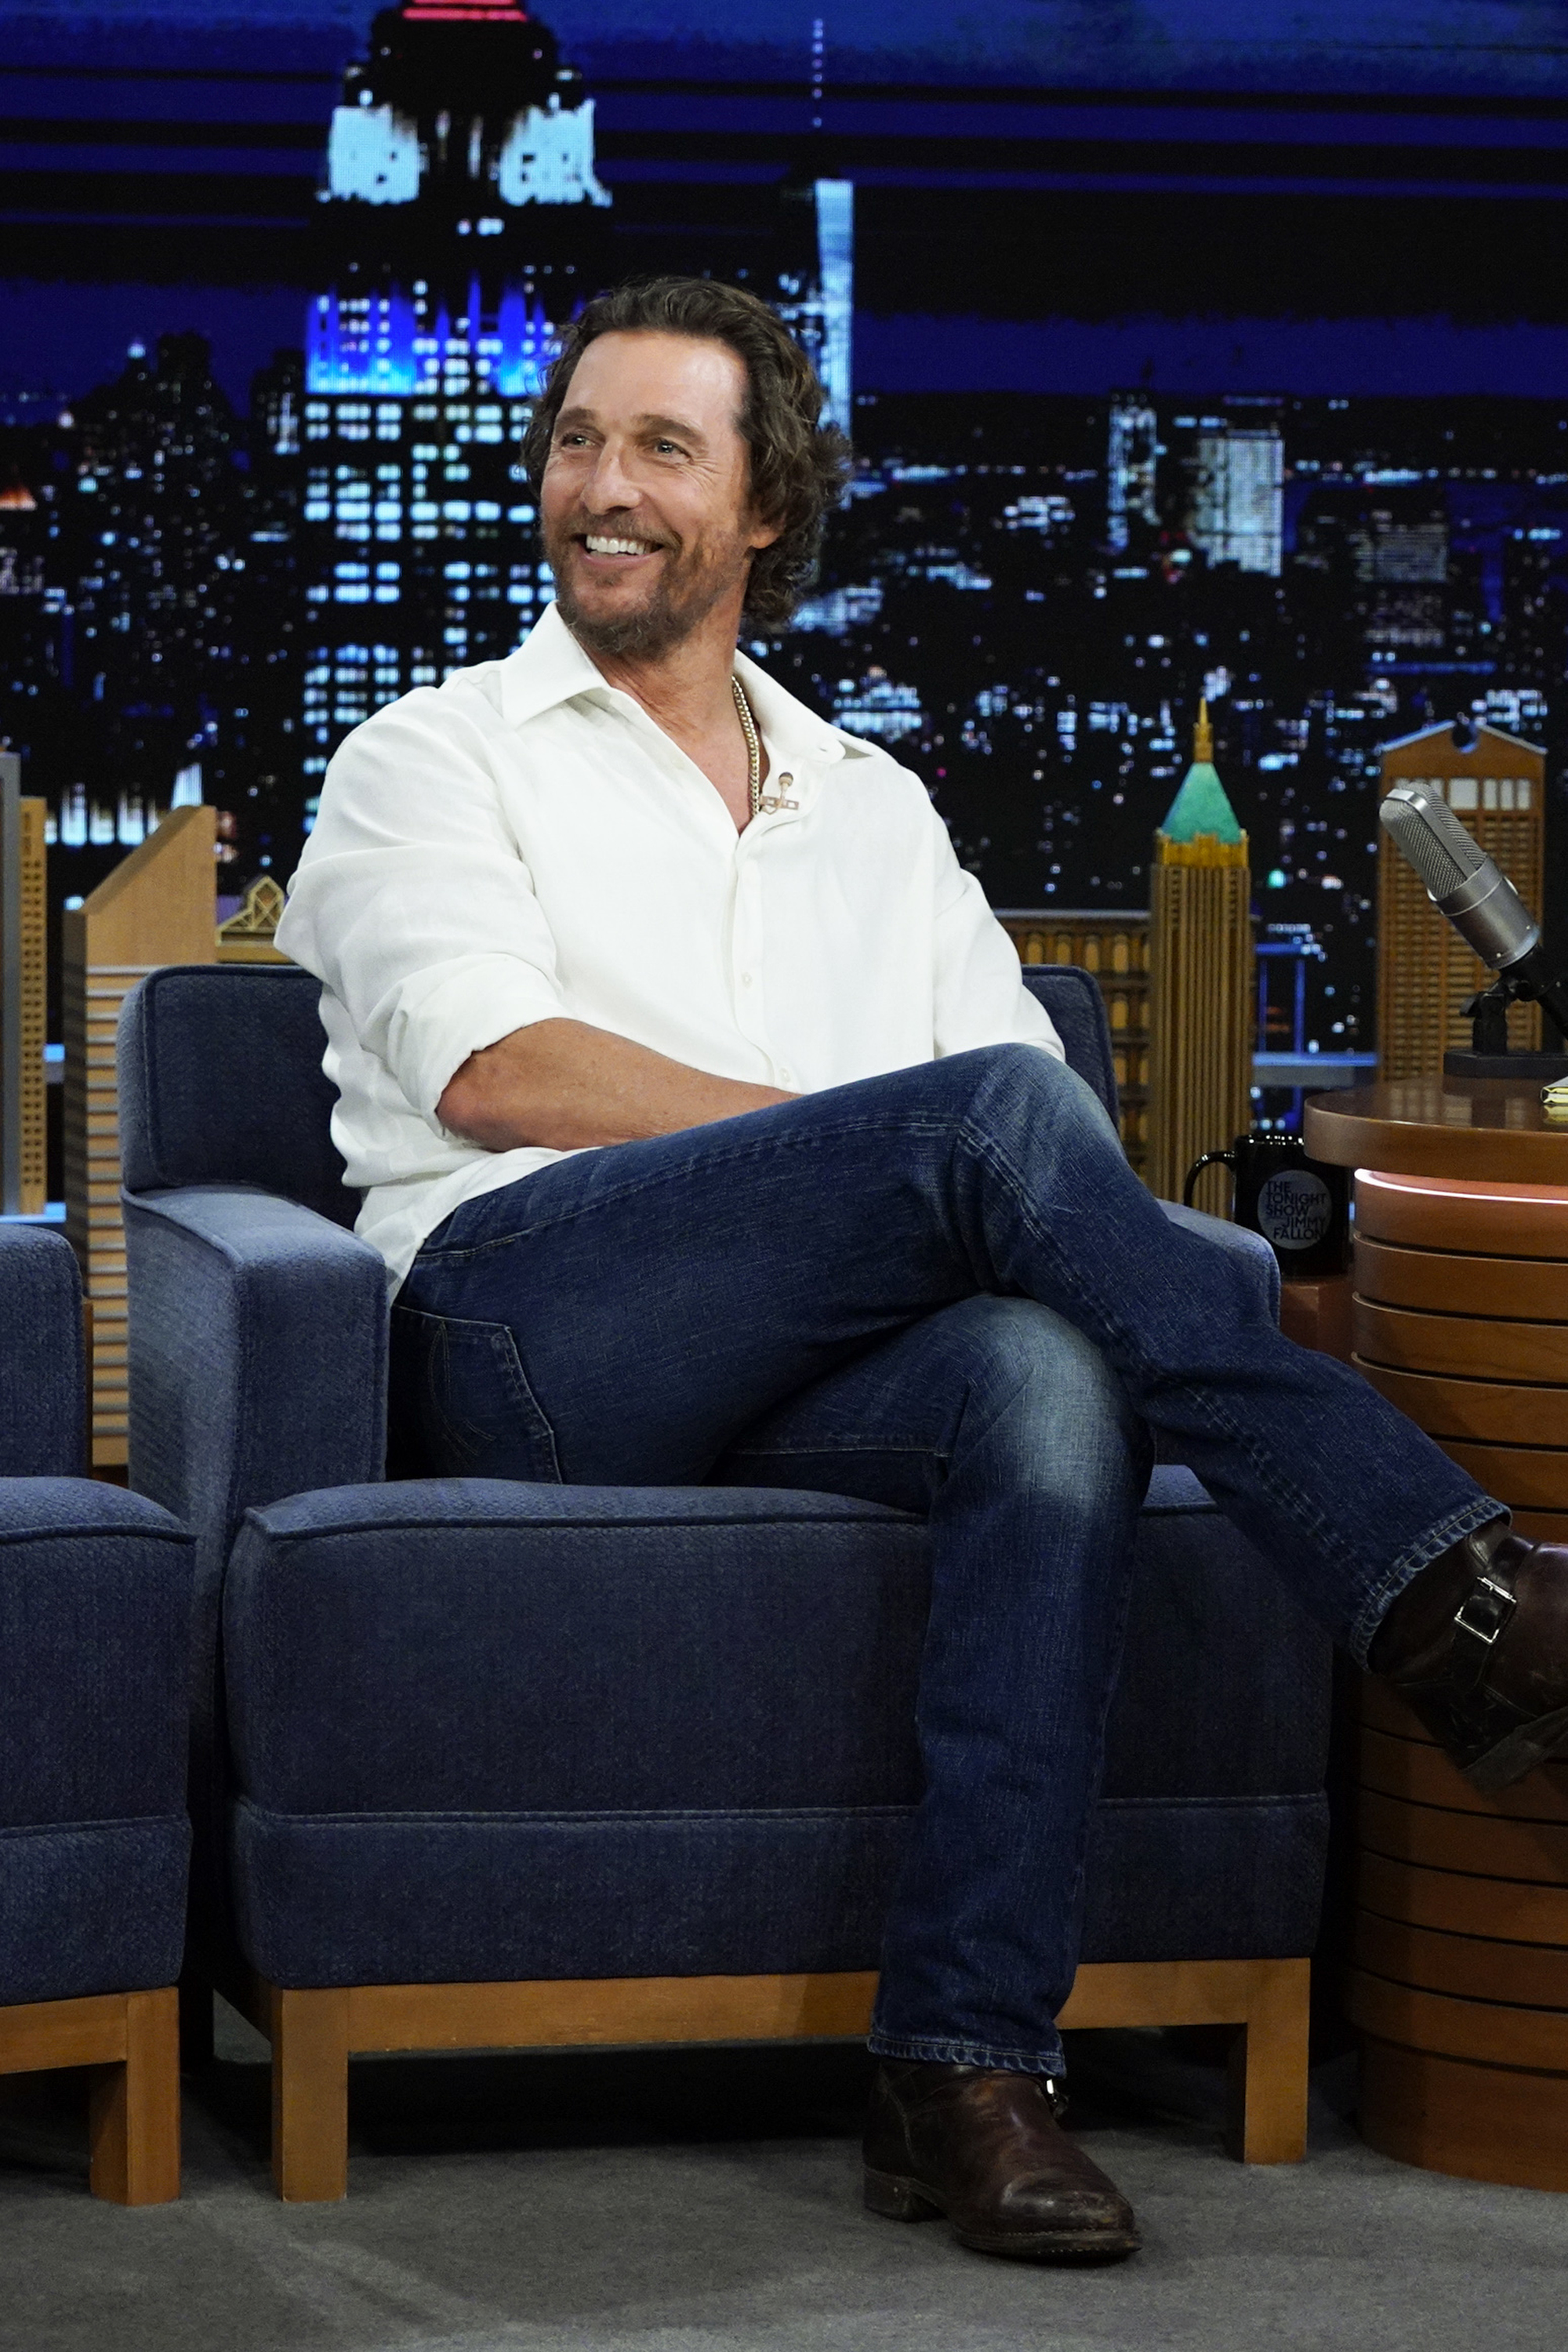 Matthew McConaughey during an interview on "The Tonight Show Starring Jimmy Fallon" Season 10 | Source: Getty Images